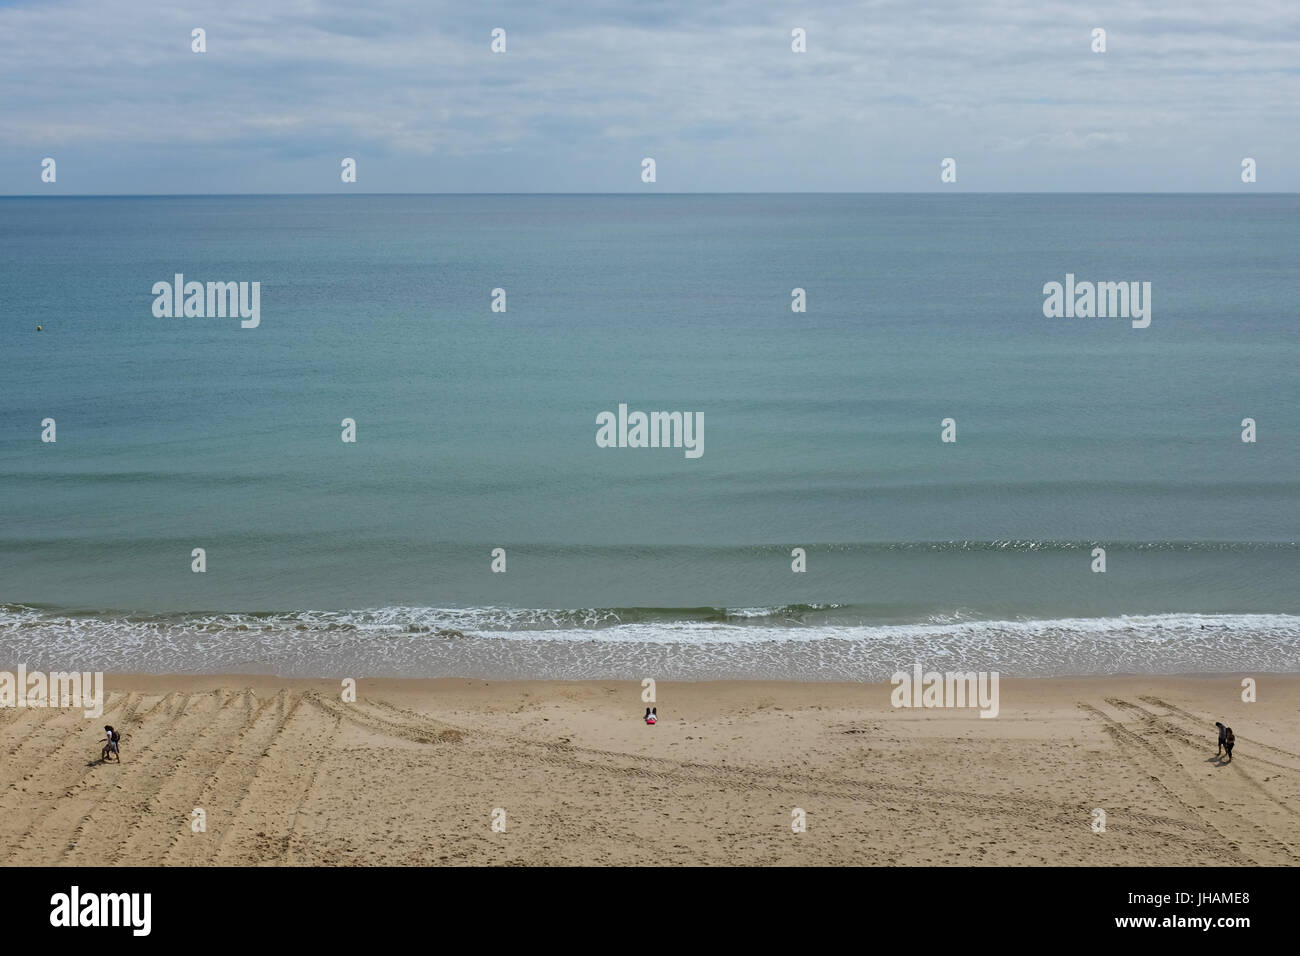 Durley Chine Beach in Bournemouth, England. Stockfoto